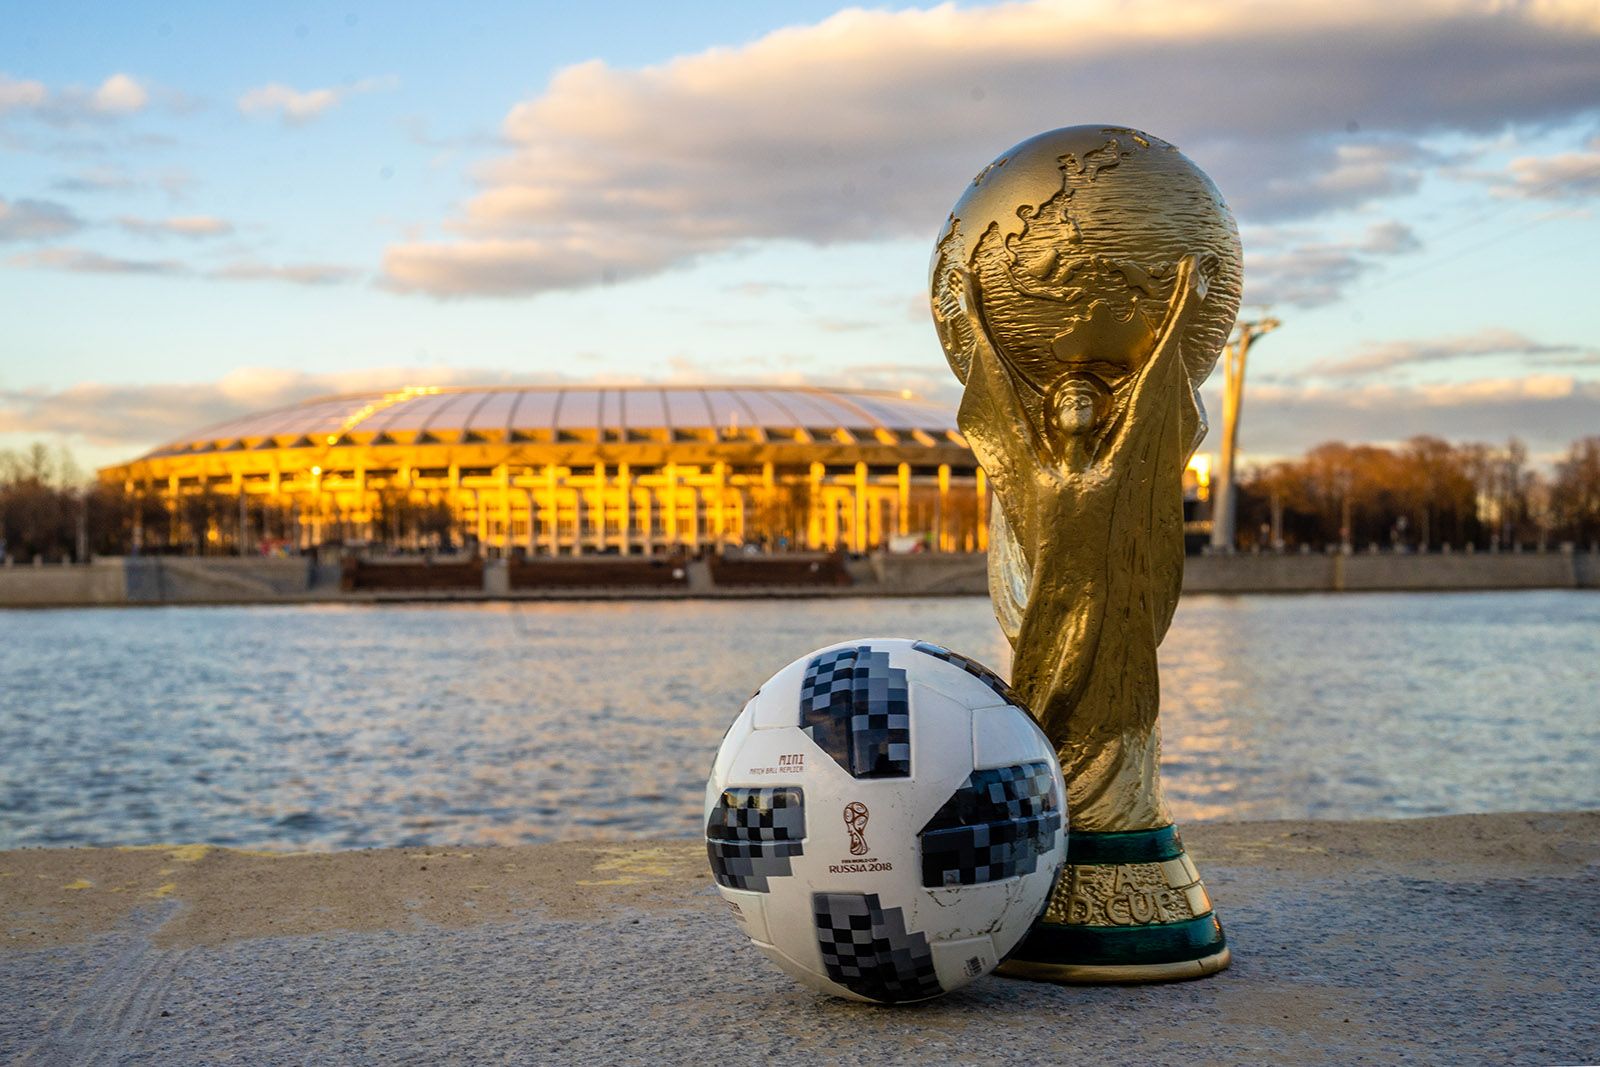 Bbc Iplayer To Stream All Bbc World Cup 2018 Matches In 4k Hdr image 1